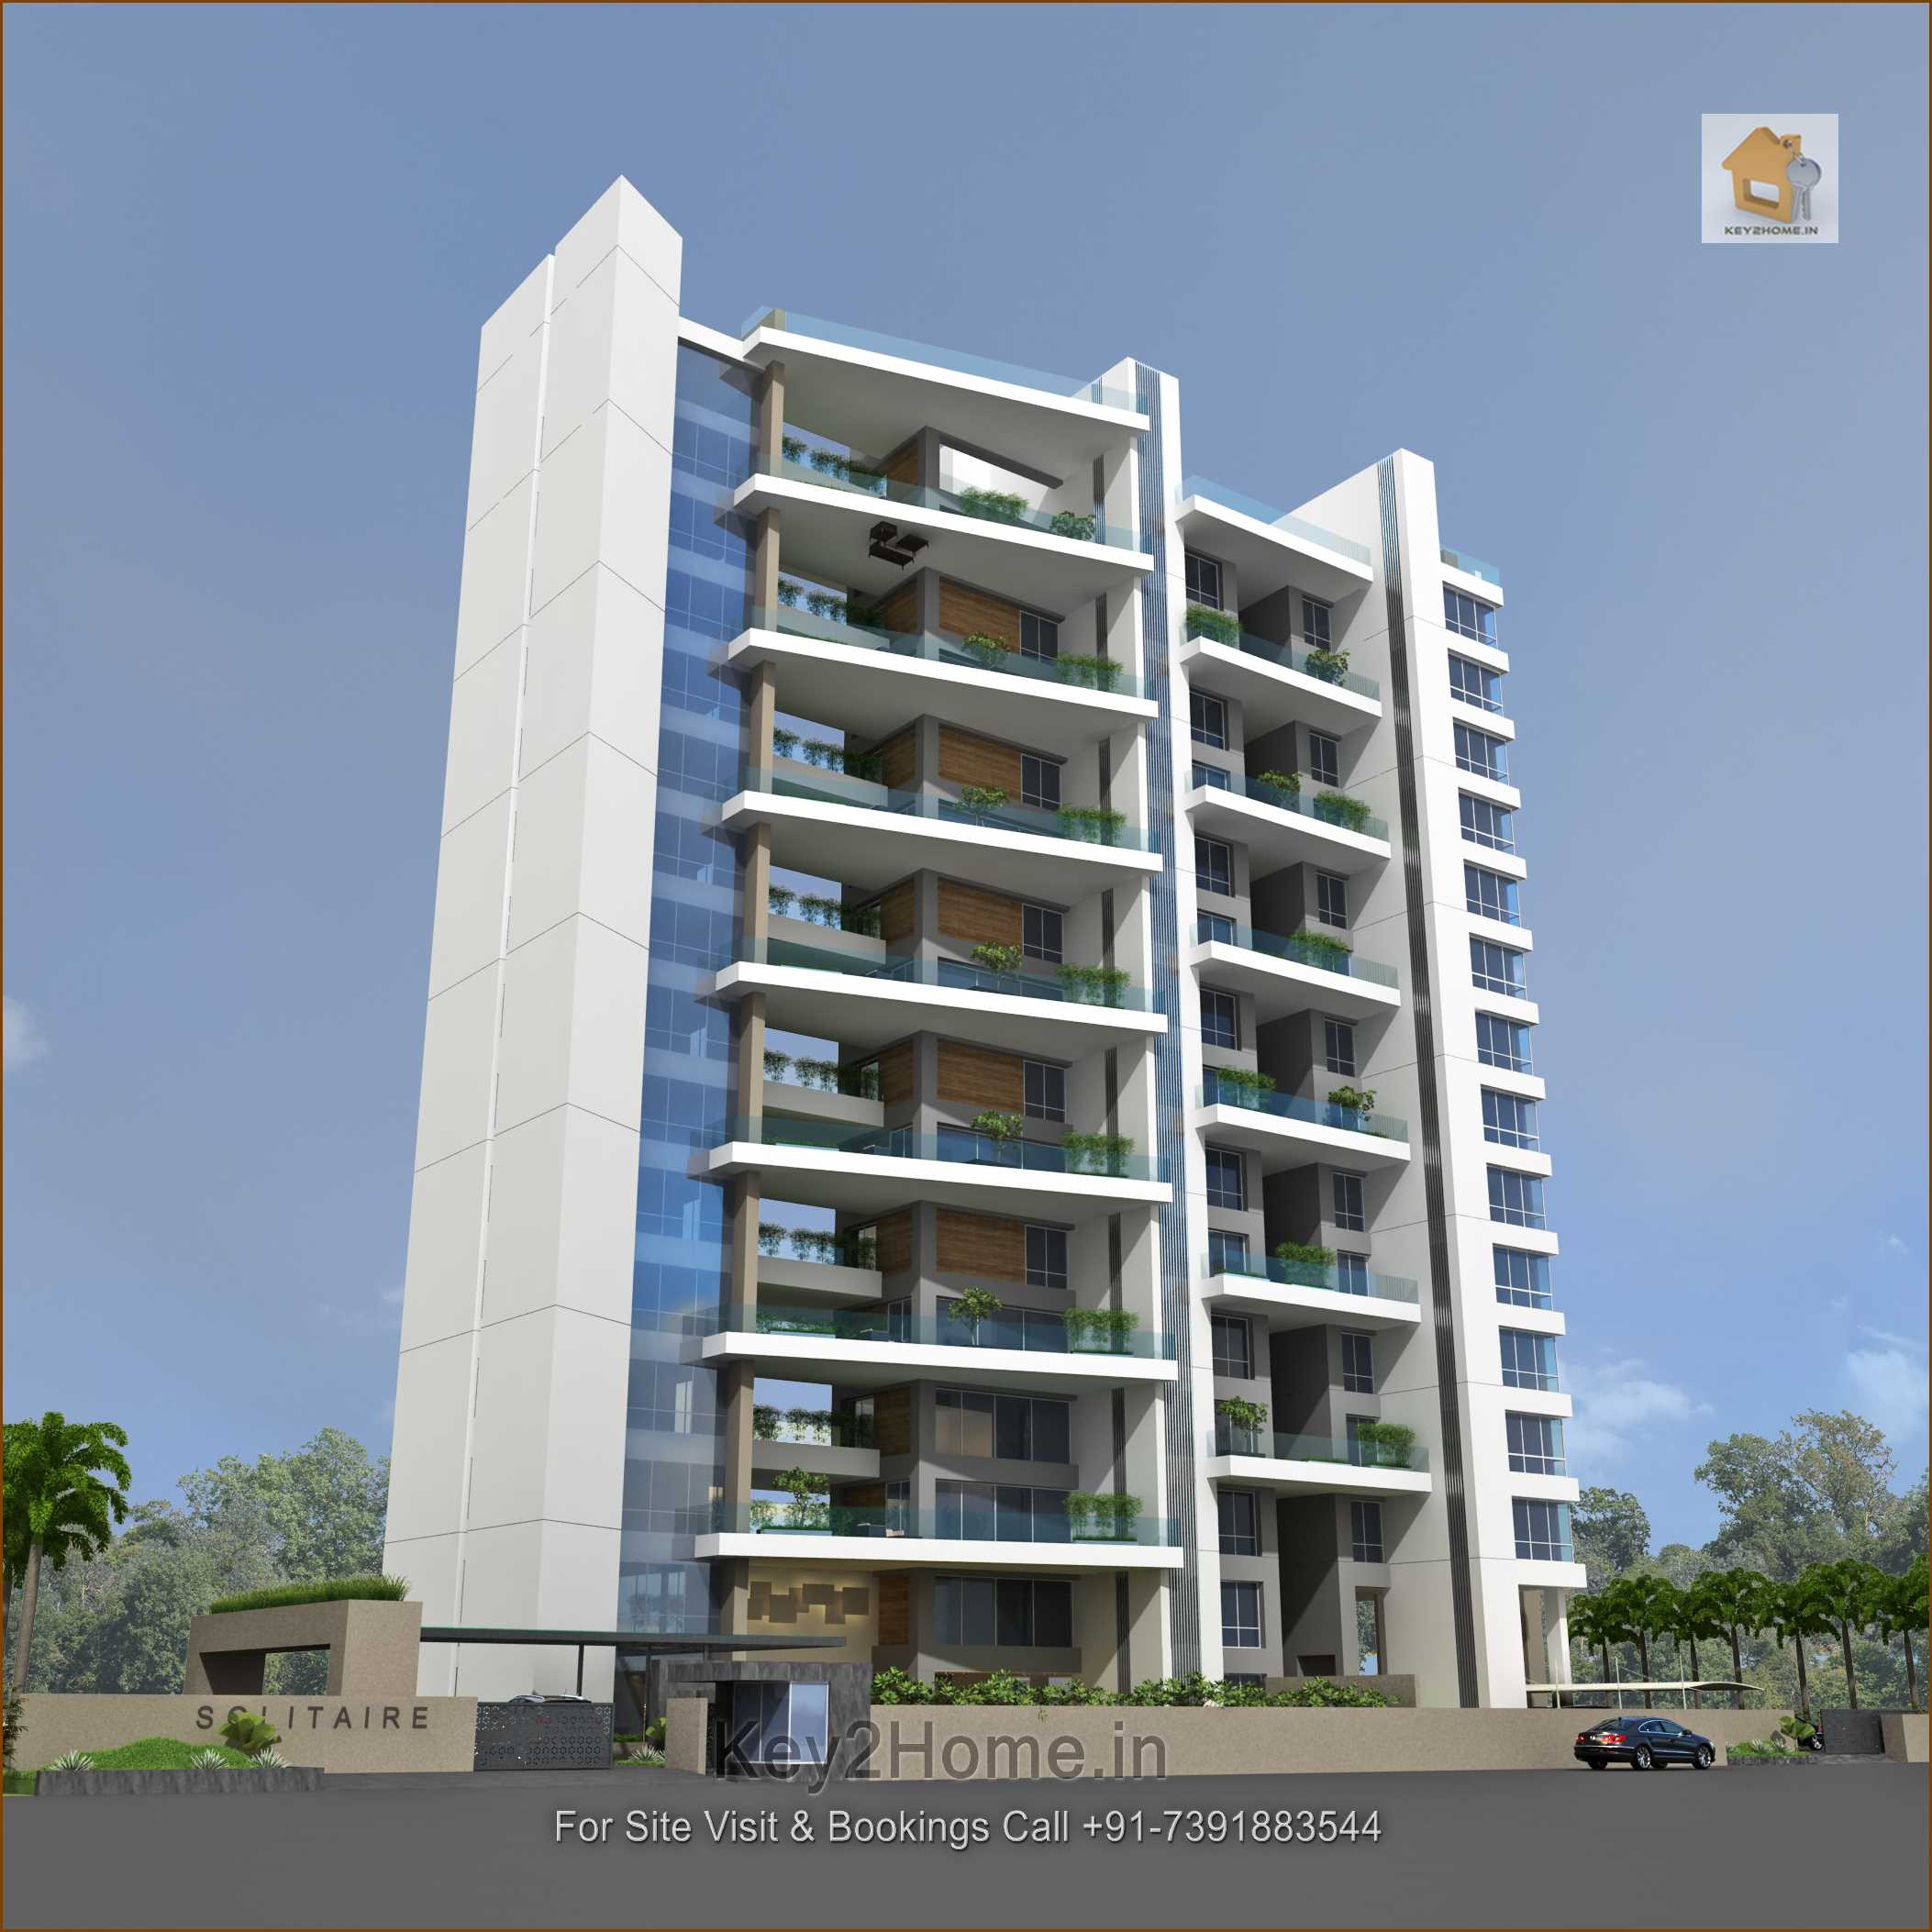 1-Luxury-5-BHK-apartments-Baner-at-Solitare-7